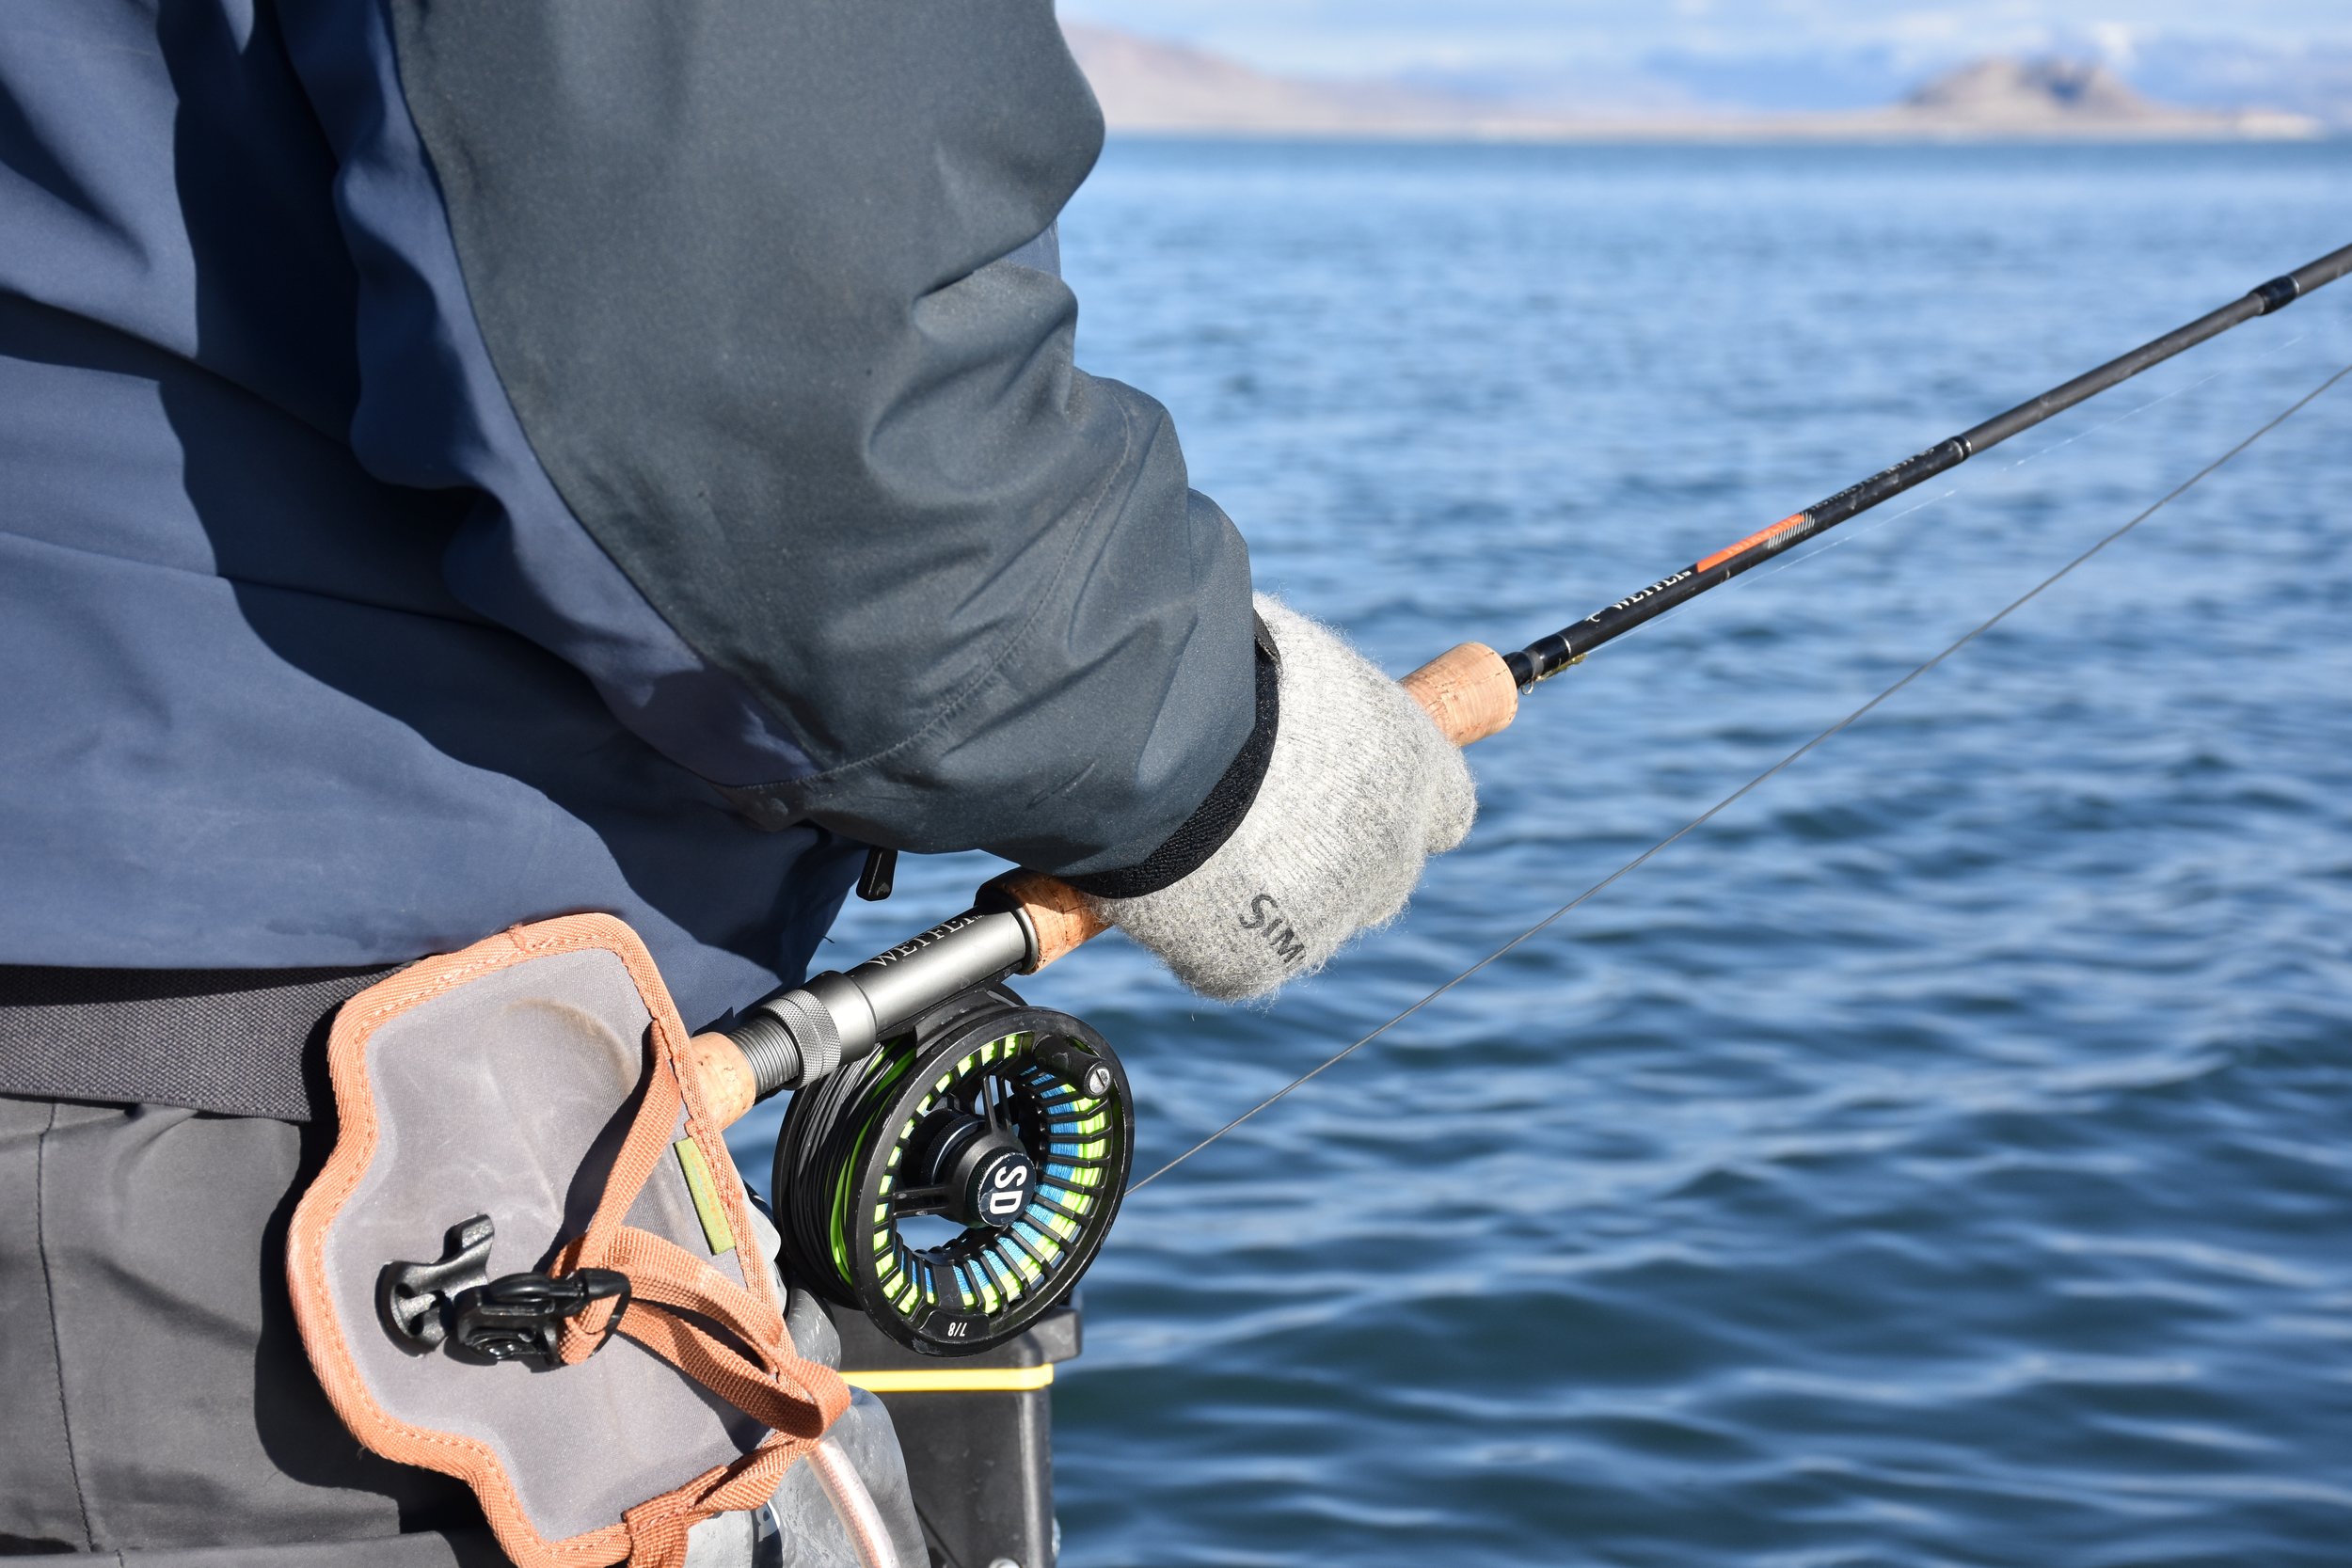 The Smithfly Switch Belt and Digi pouch, Fly Fishing Gear That I